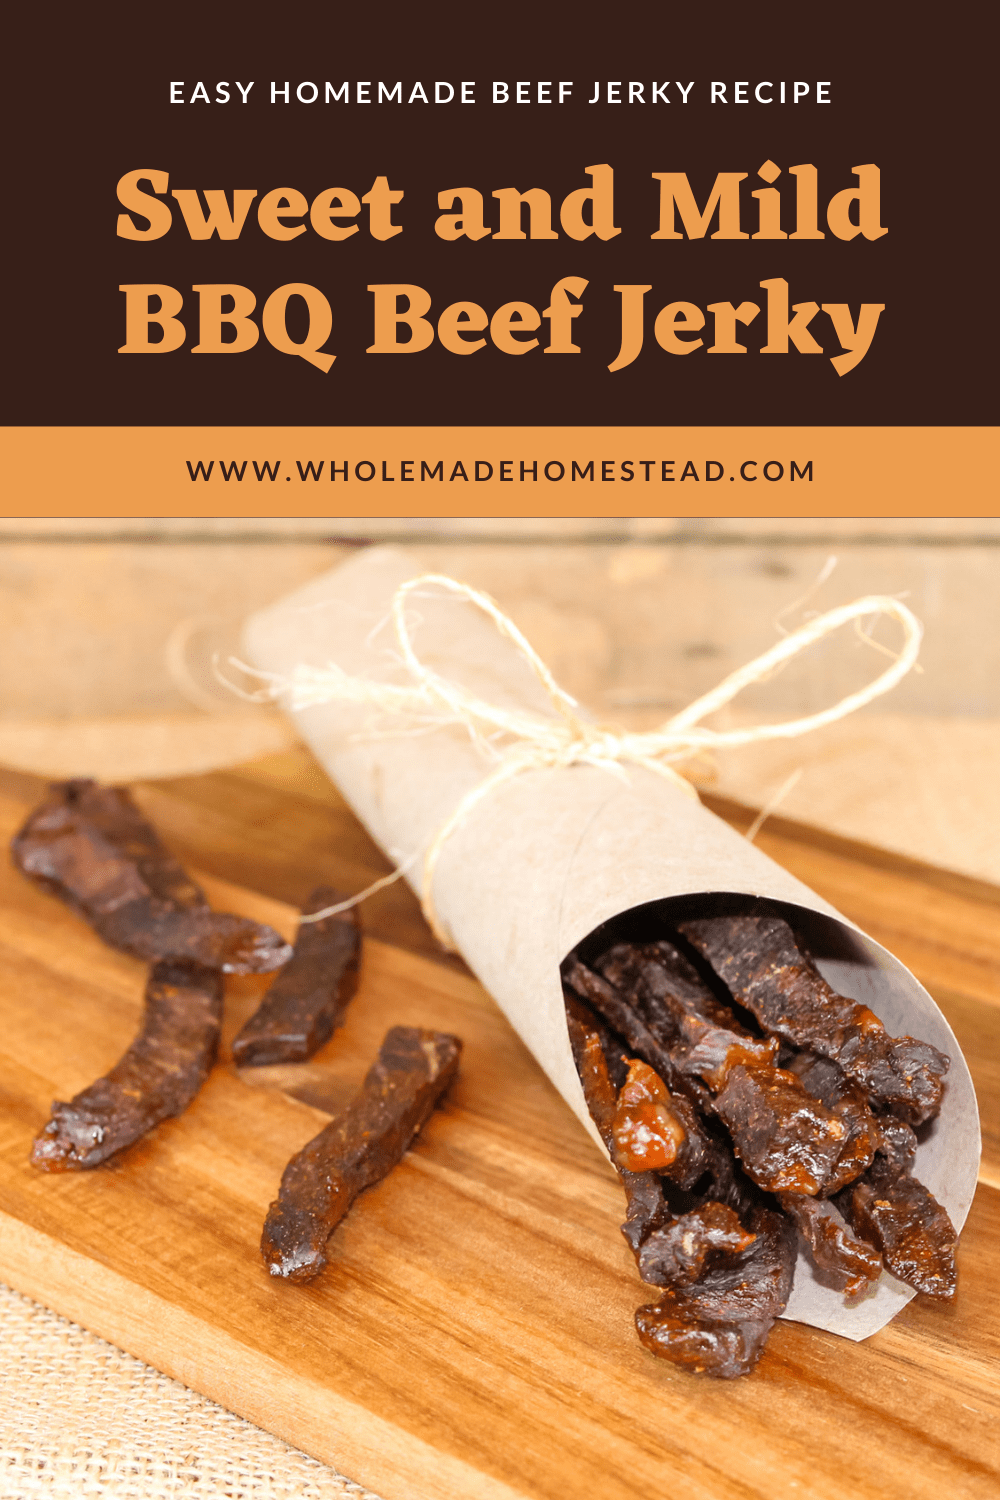 https://wholemadehomestead.com/wp-content/uploads/2022/02/Sweet-and-Mild-BBQ-Beef-Jerky.png